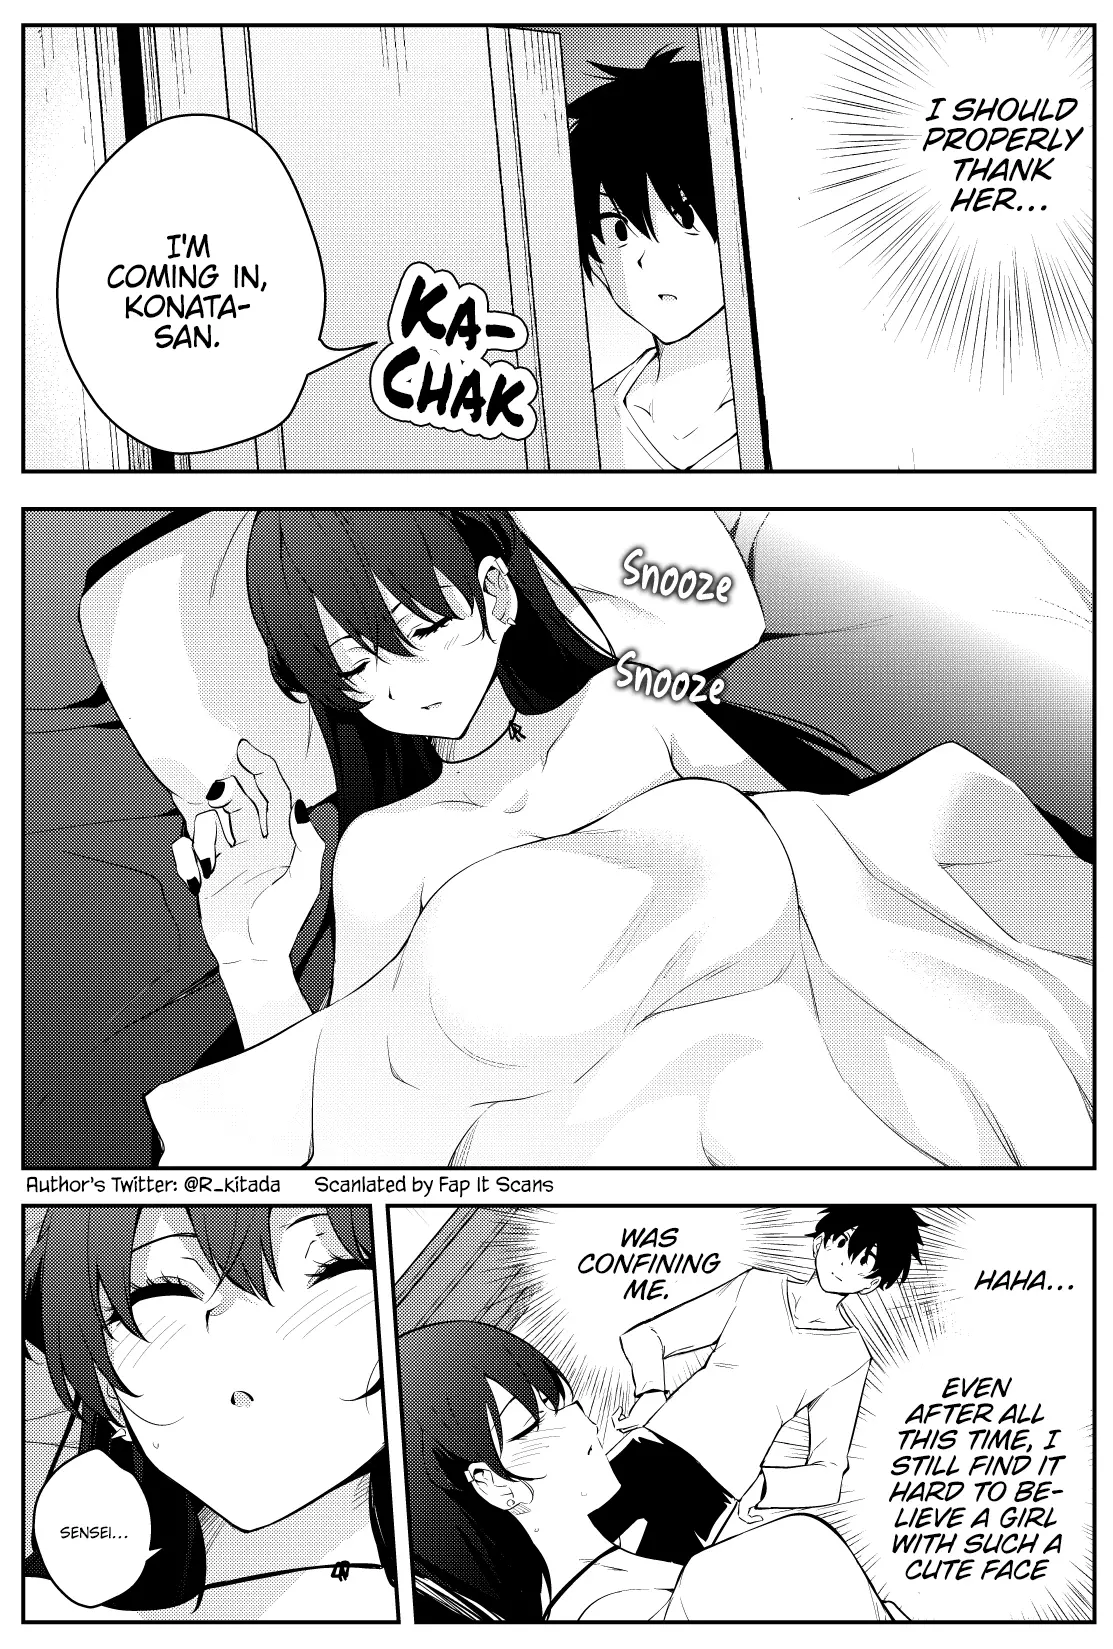 The Story Of A Manga Artist Confined By A Strange High School Girl - 47 page 6-10c451f7